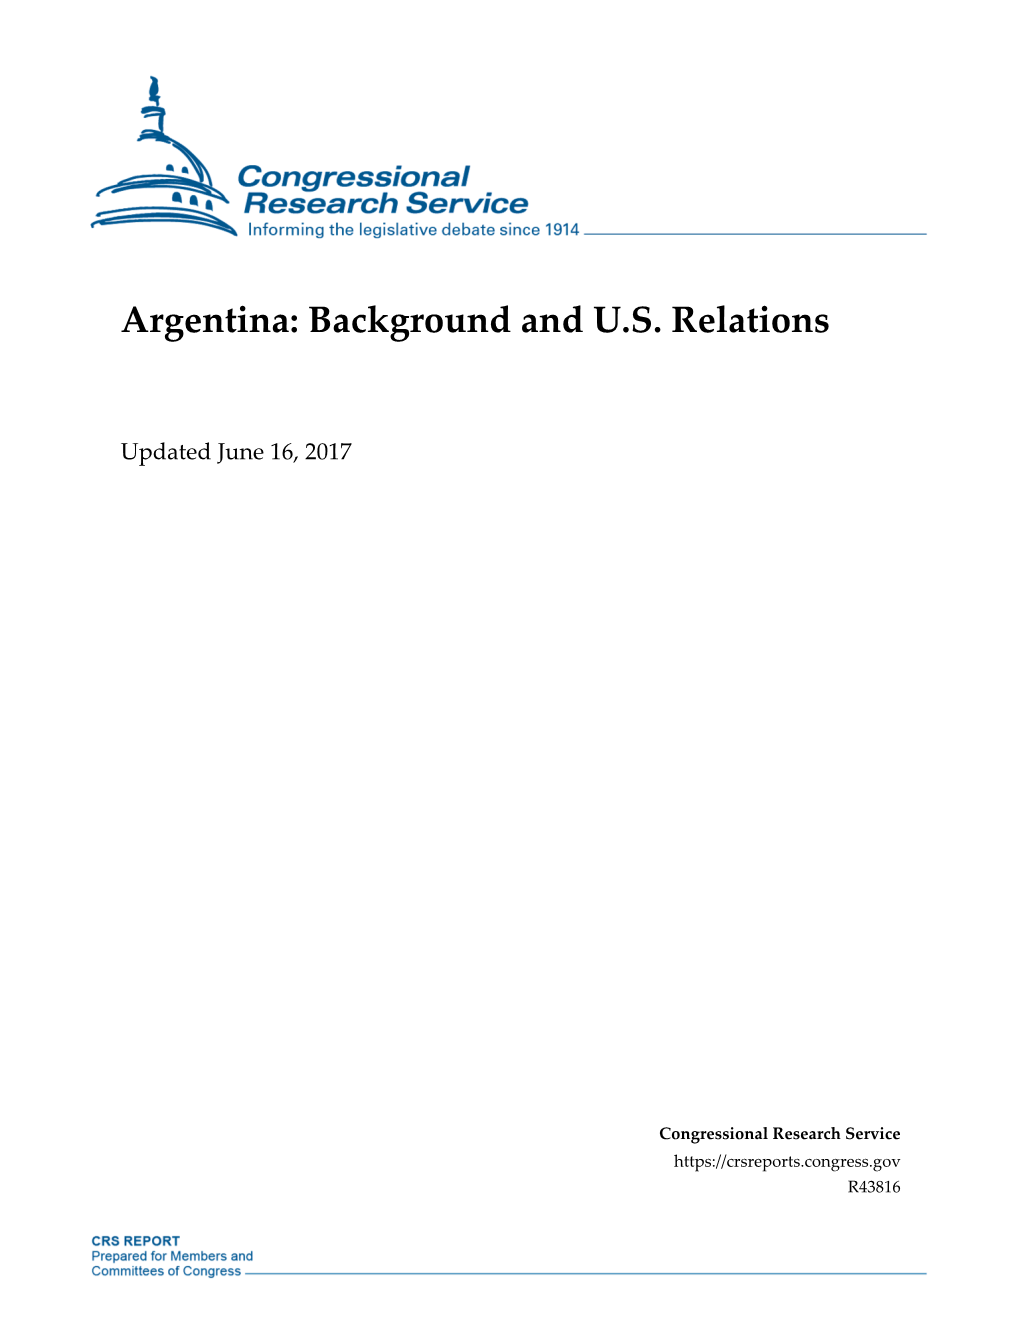 Argentina: Background and U.S. Relations